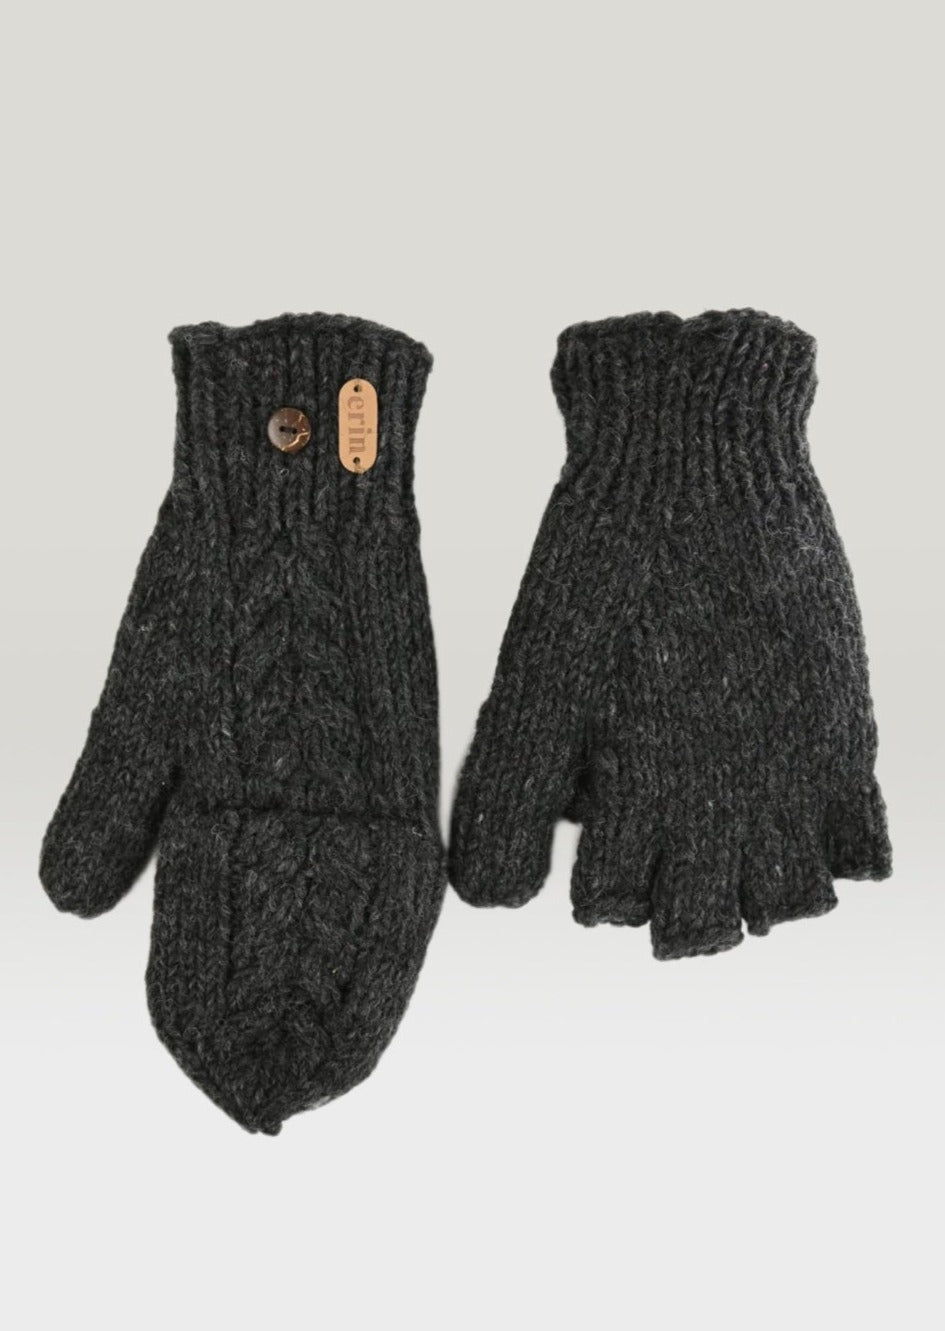 Aran Cable Hunter Gloves - Charcoal